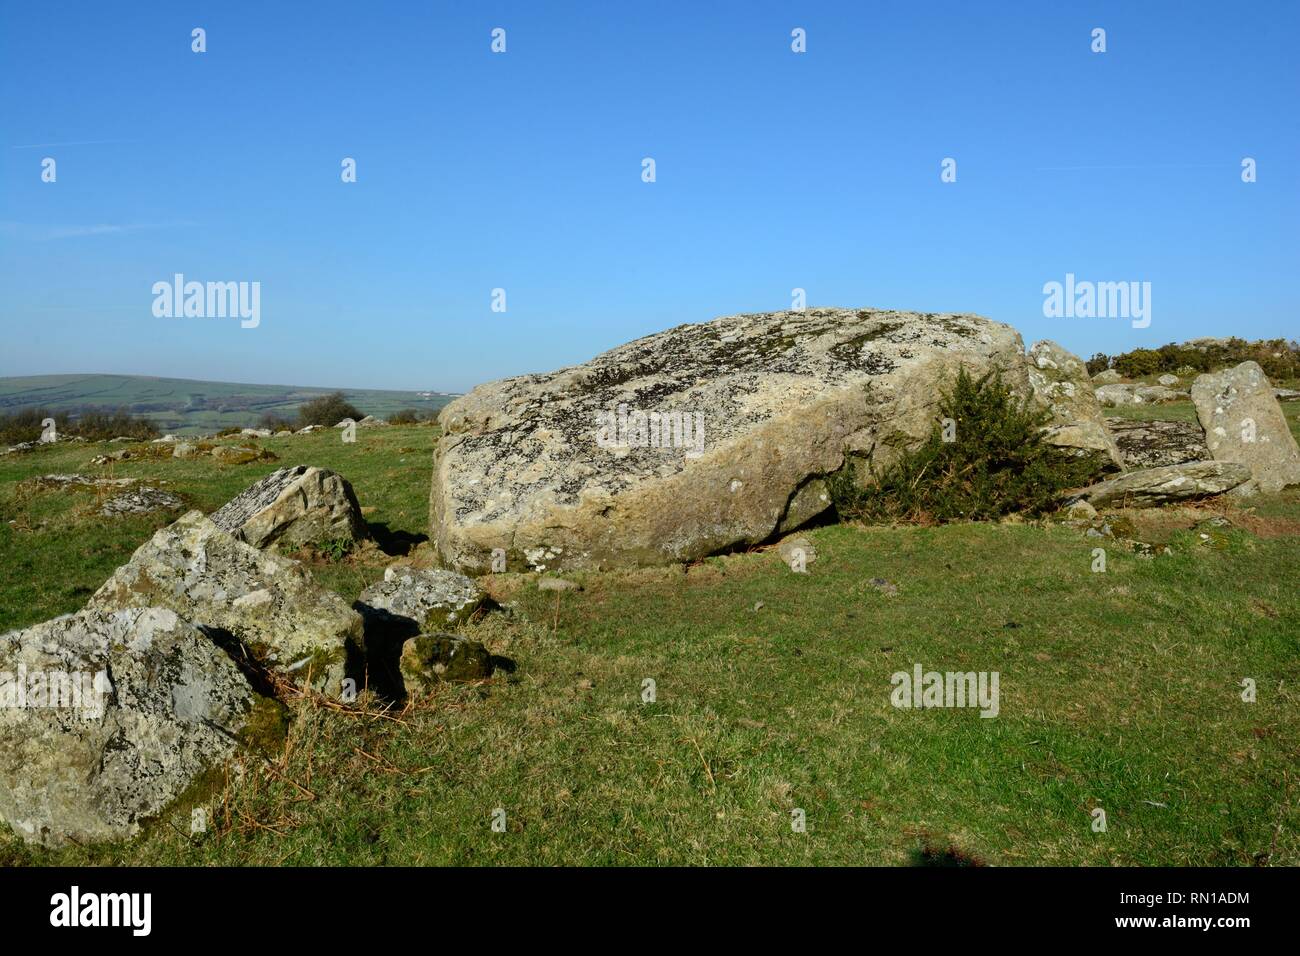 Garn Turne or Old Coldstone burial chamber with collapsed capstone thought to weigh 60 tons Neolithic period Wolfscastle Cas -BlaiddWales Cymru UK Stock Photo